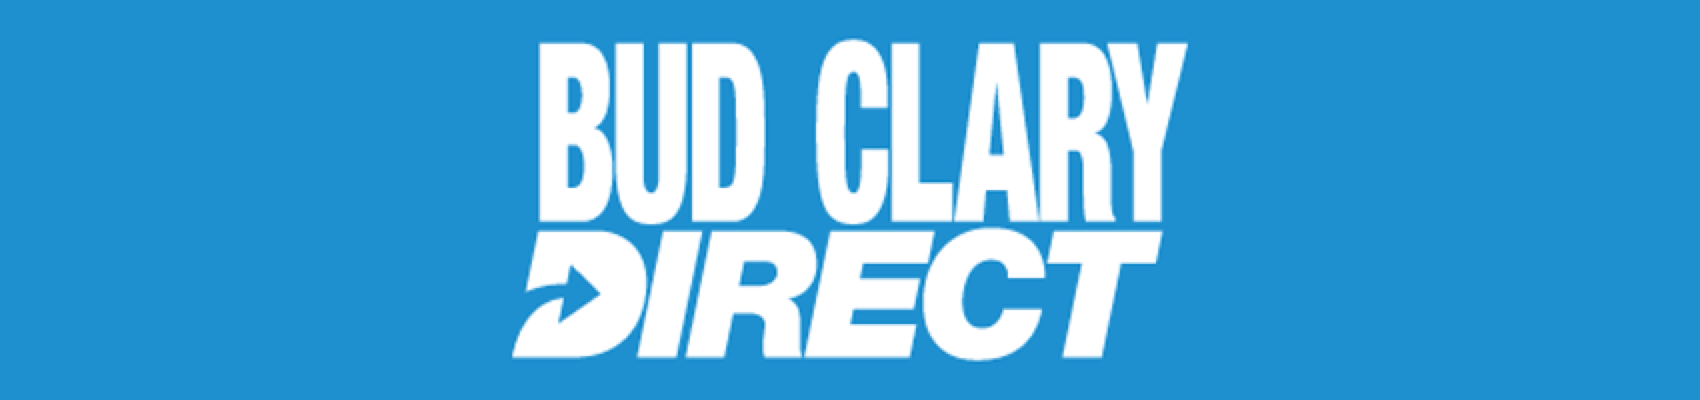 Bud Clary Direct Banner